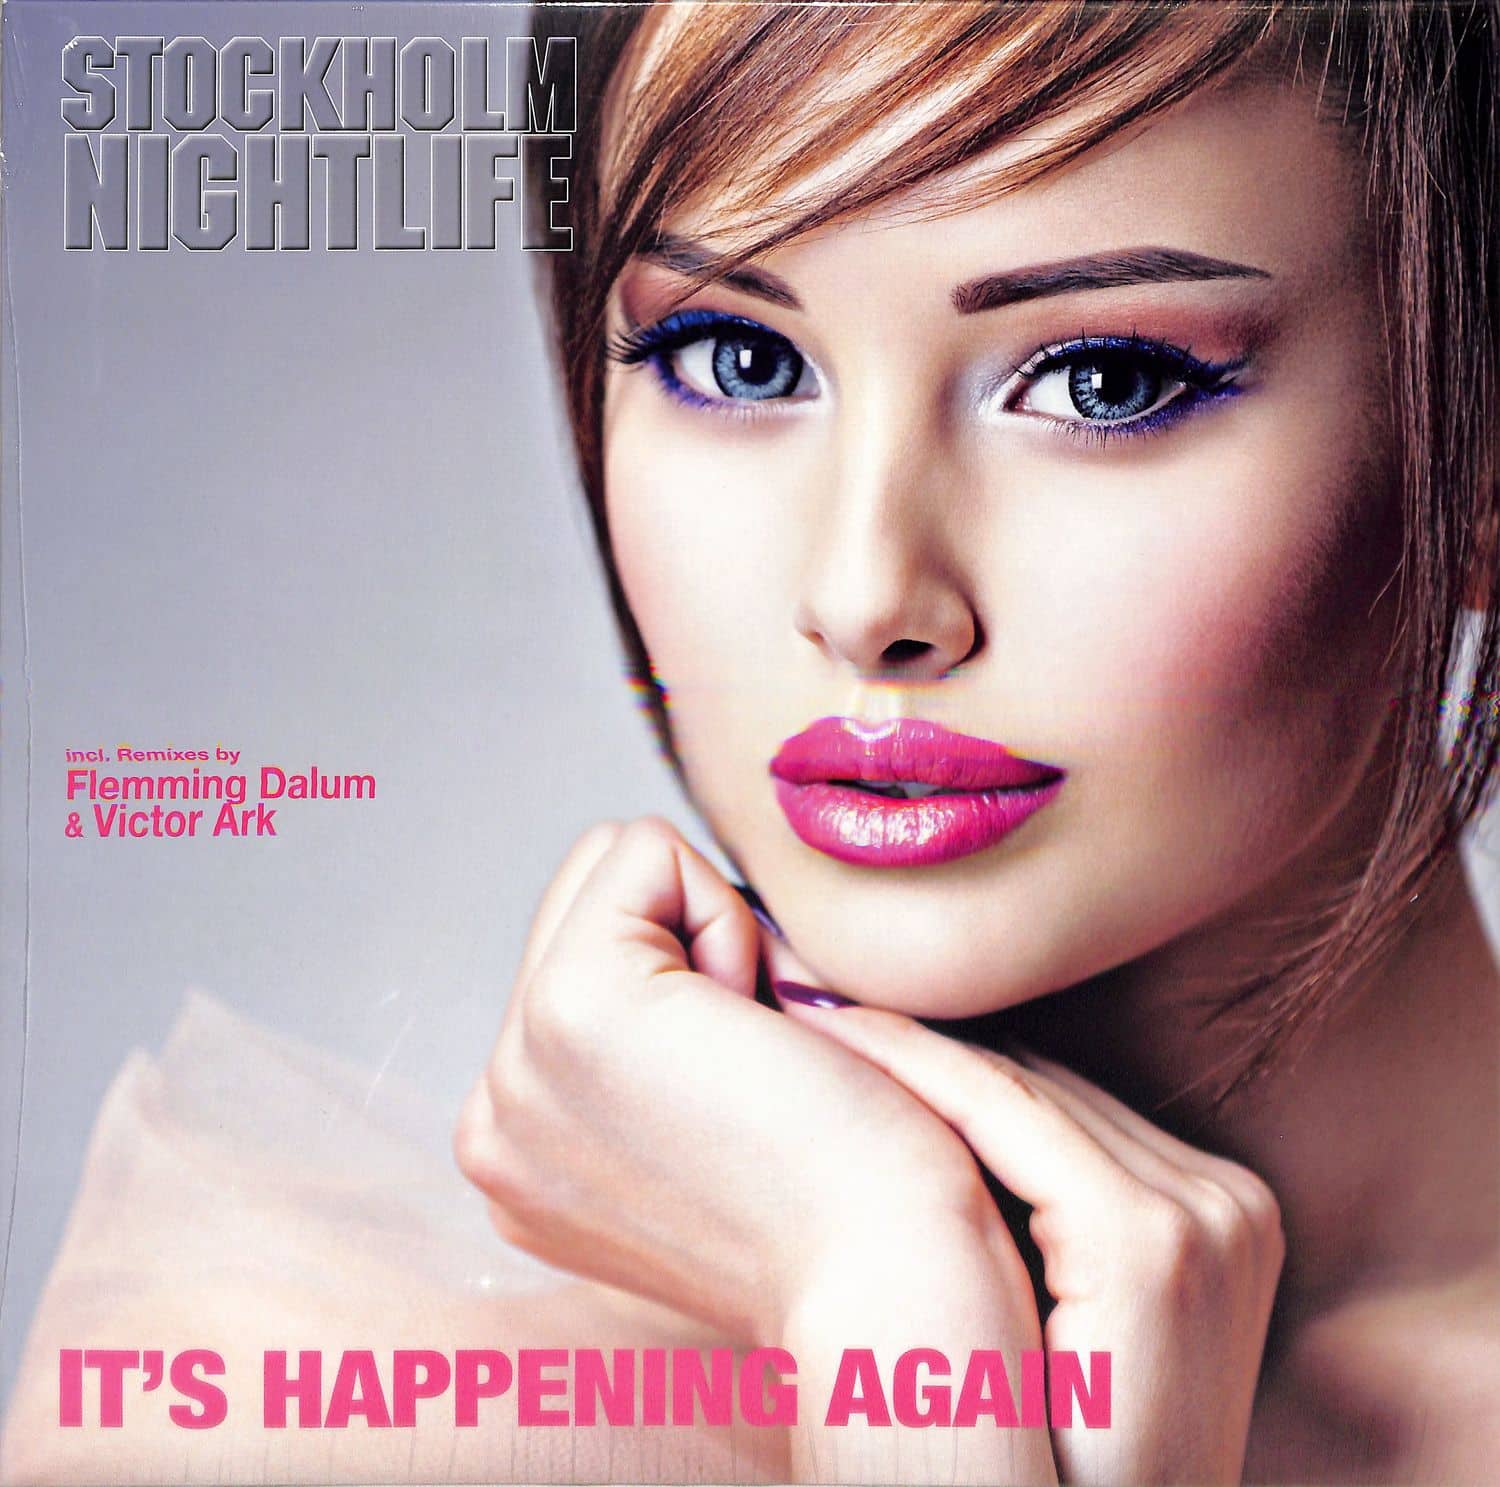 Stockholm Nightlife ft. Helly - ITS HAPPENING AGAIN